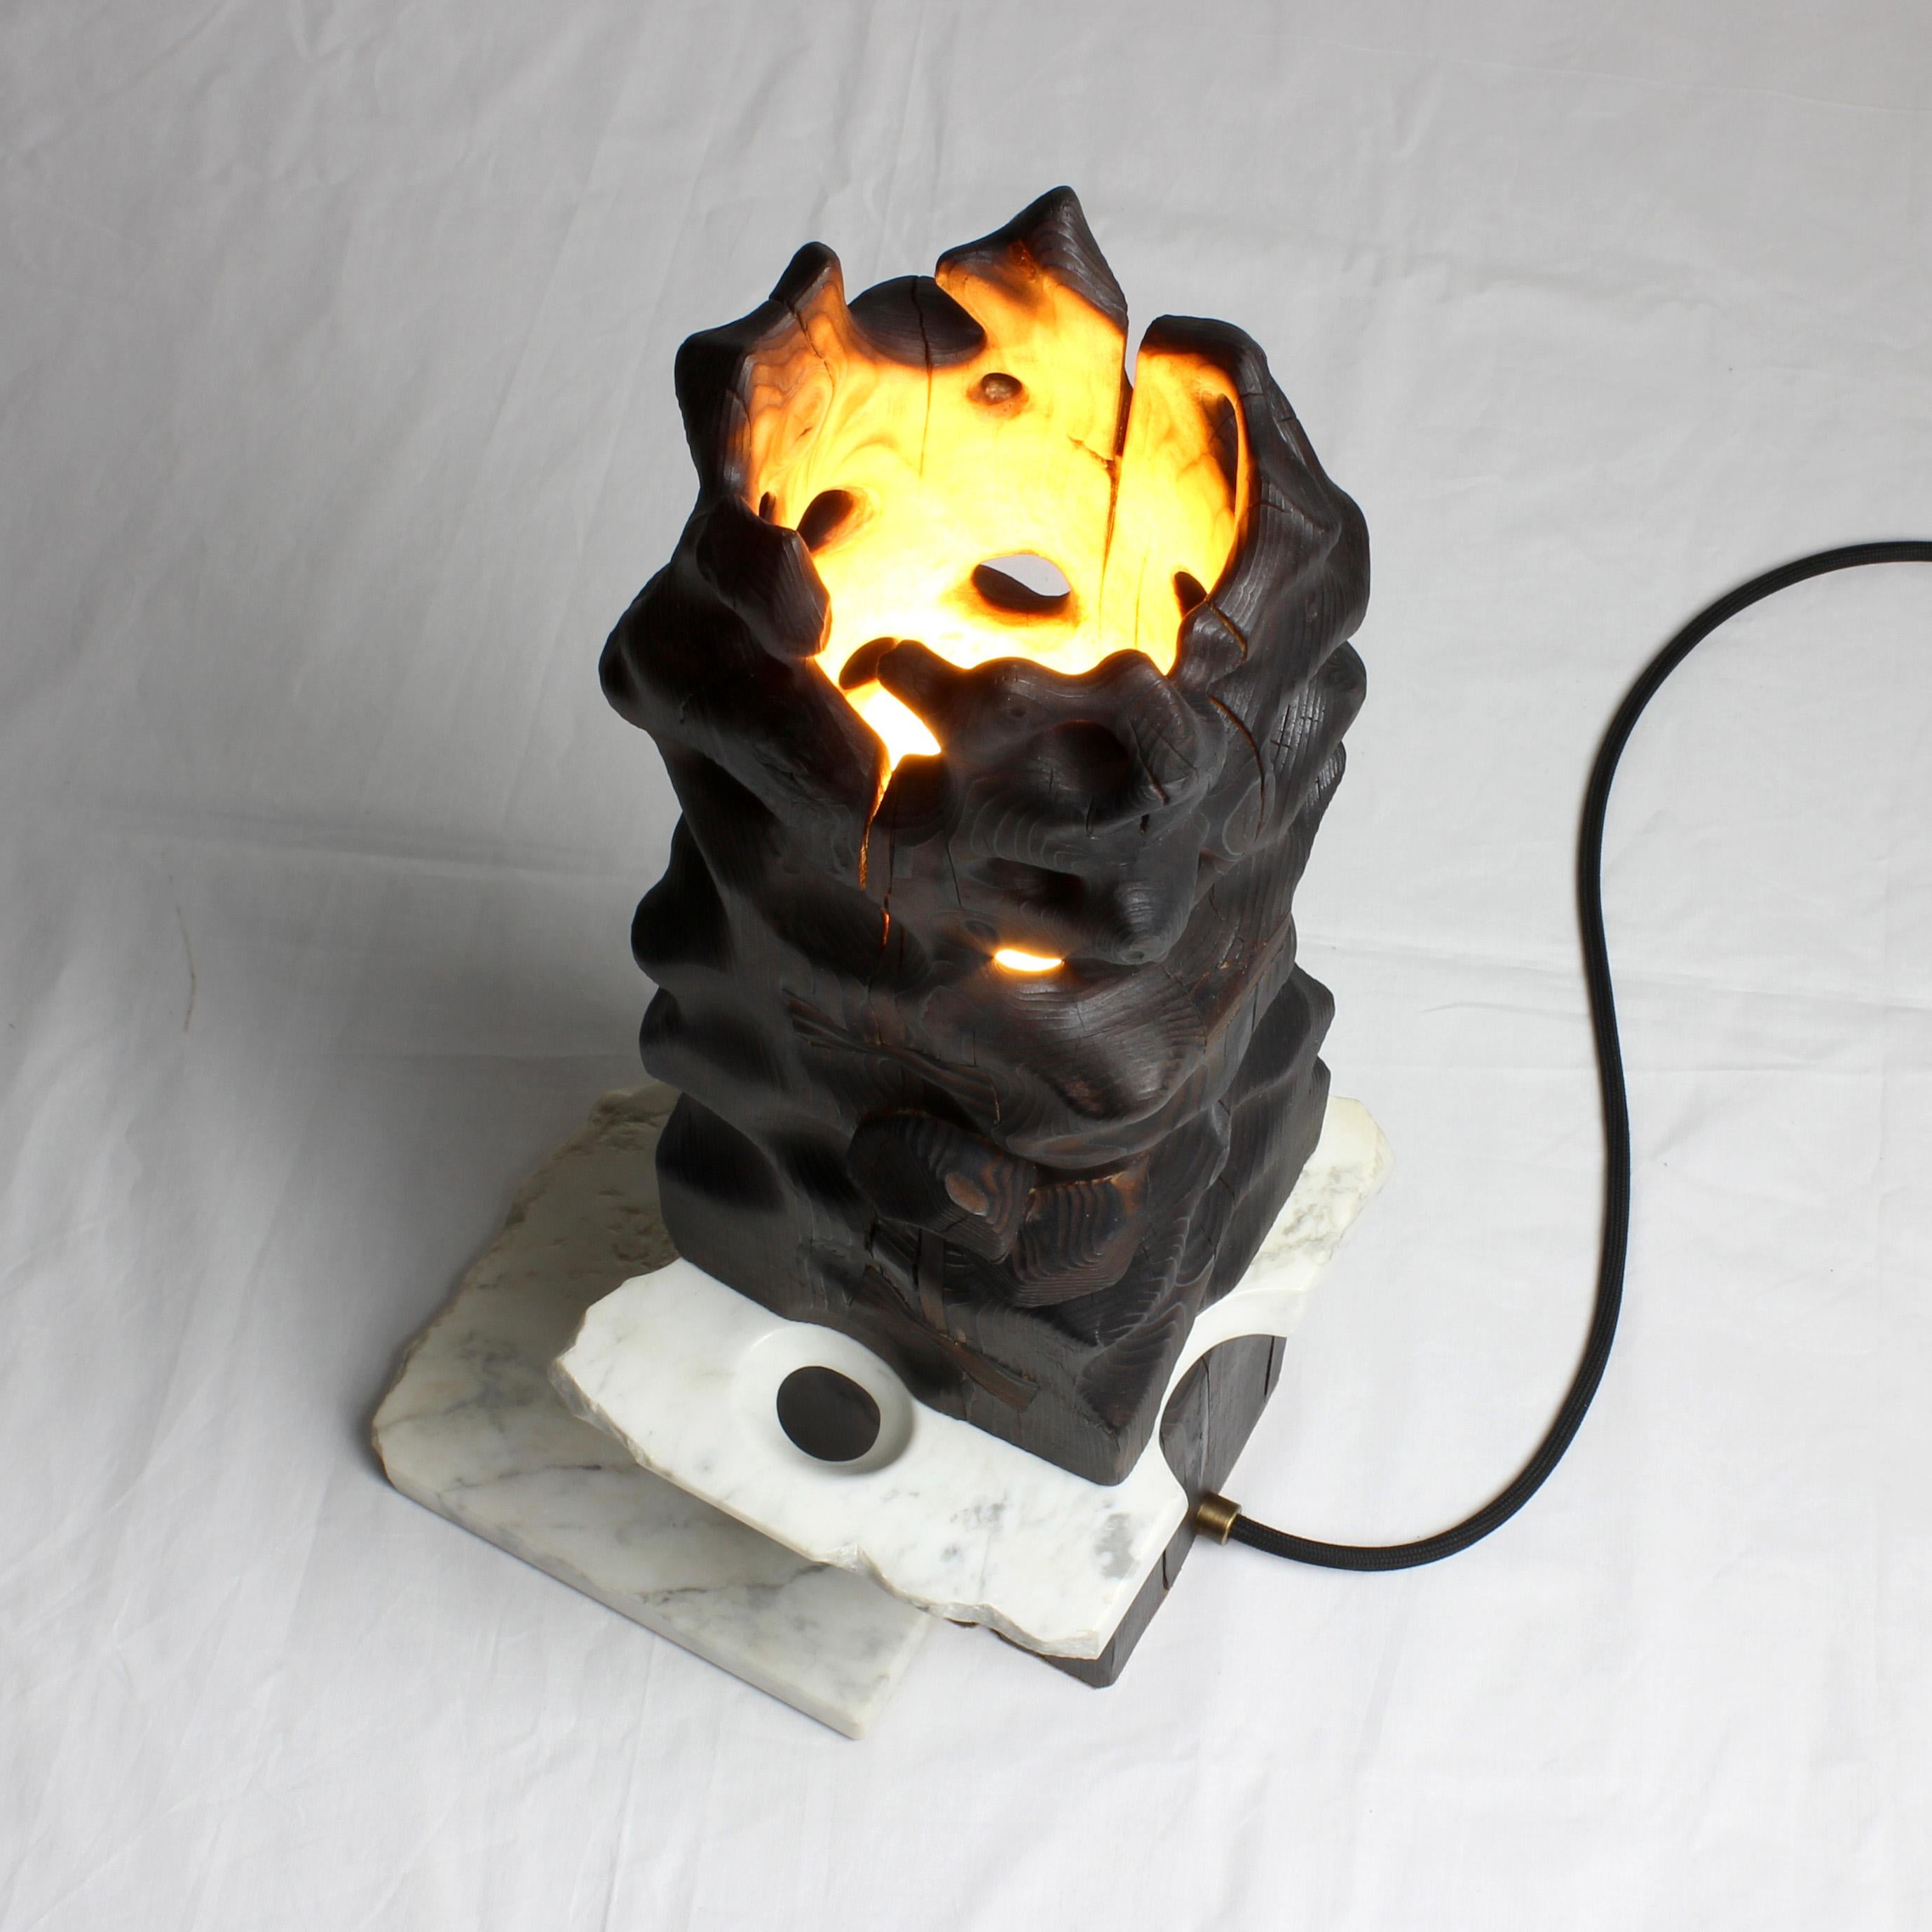 Volcano - Sculptured Lighting, Table Lamp from Reclaimed Burned Wood and Marble For Sale 1